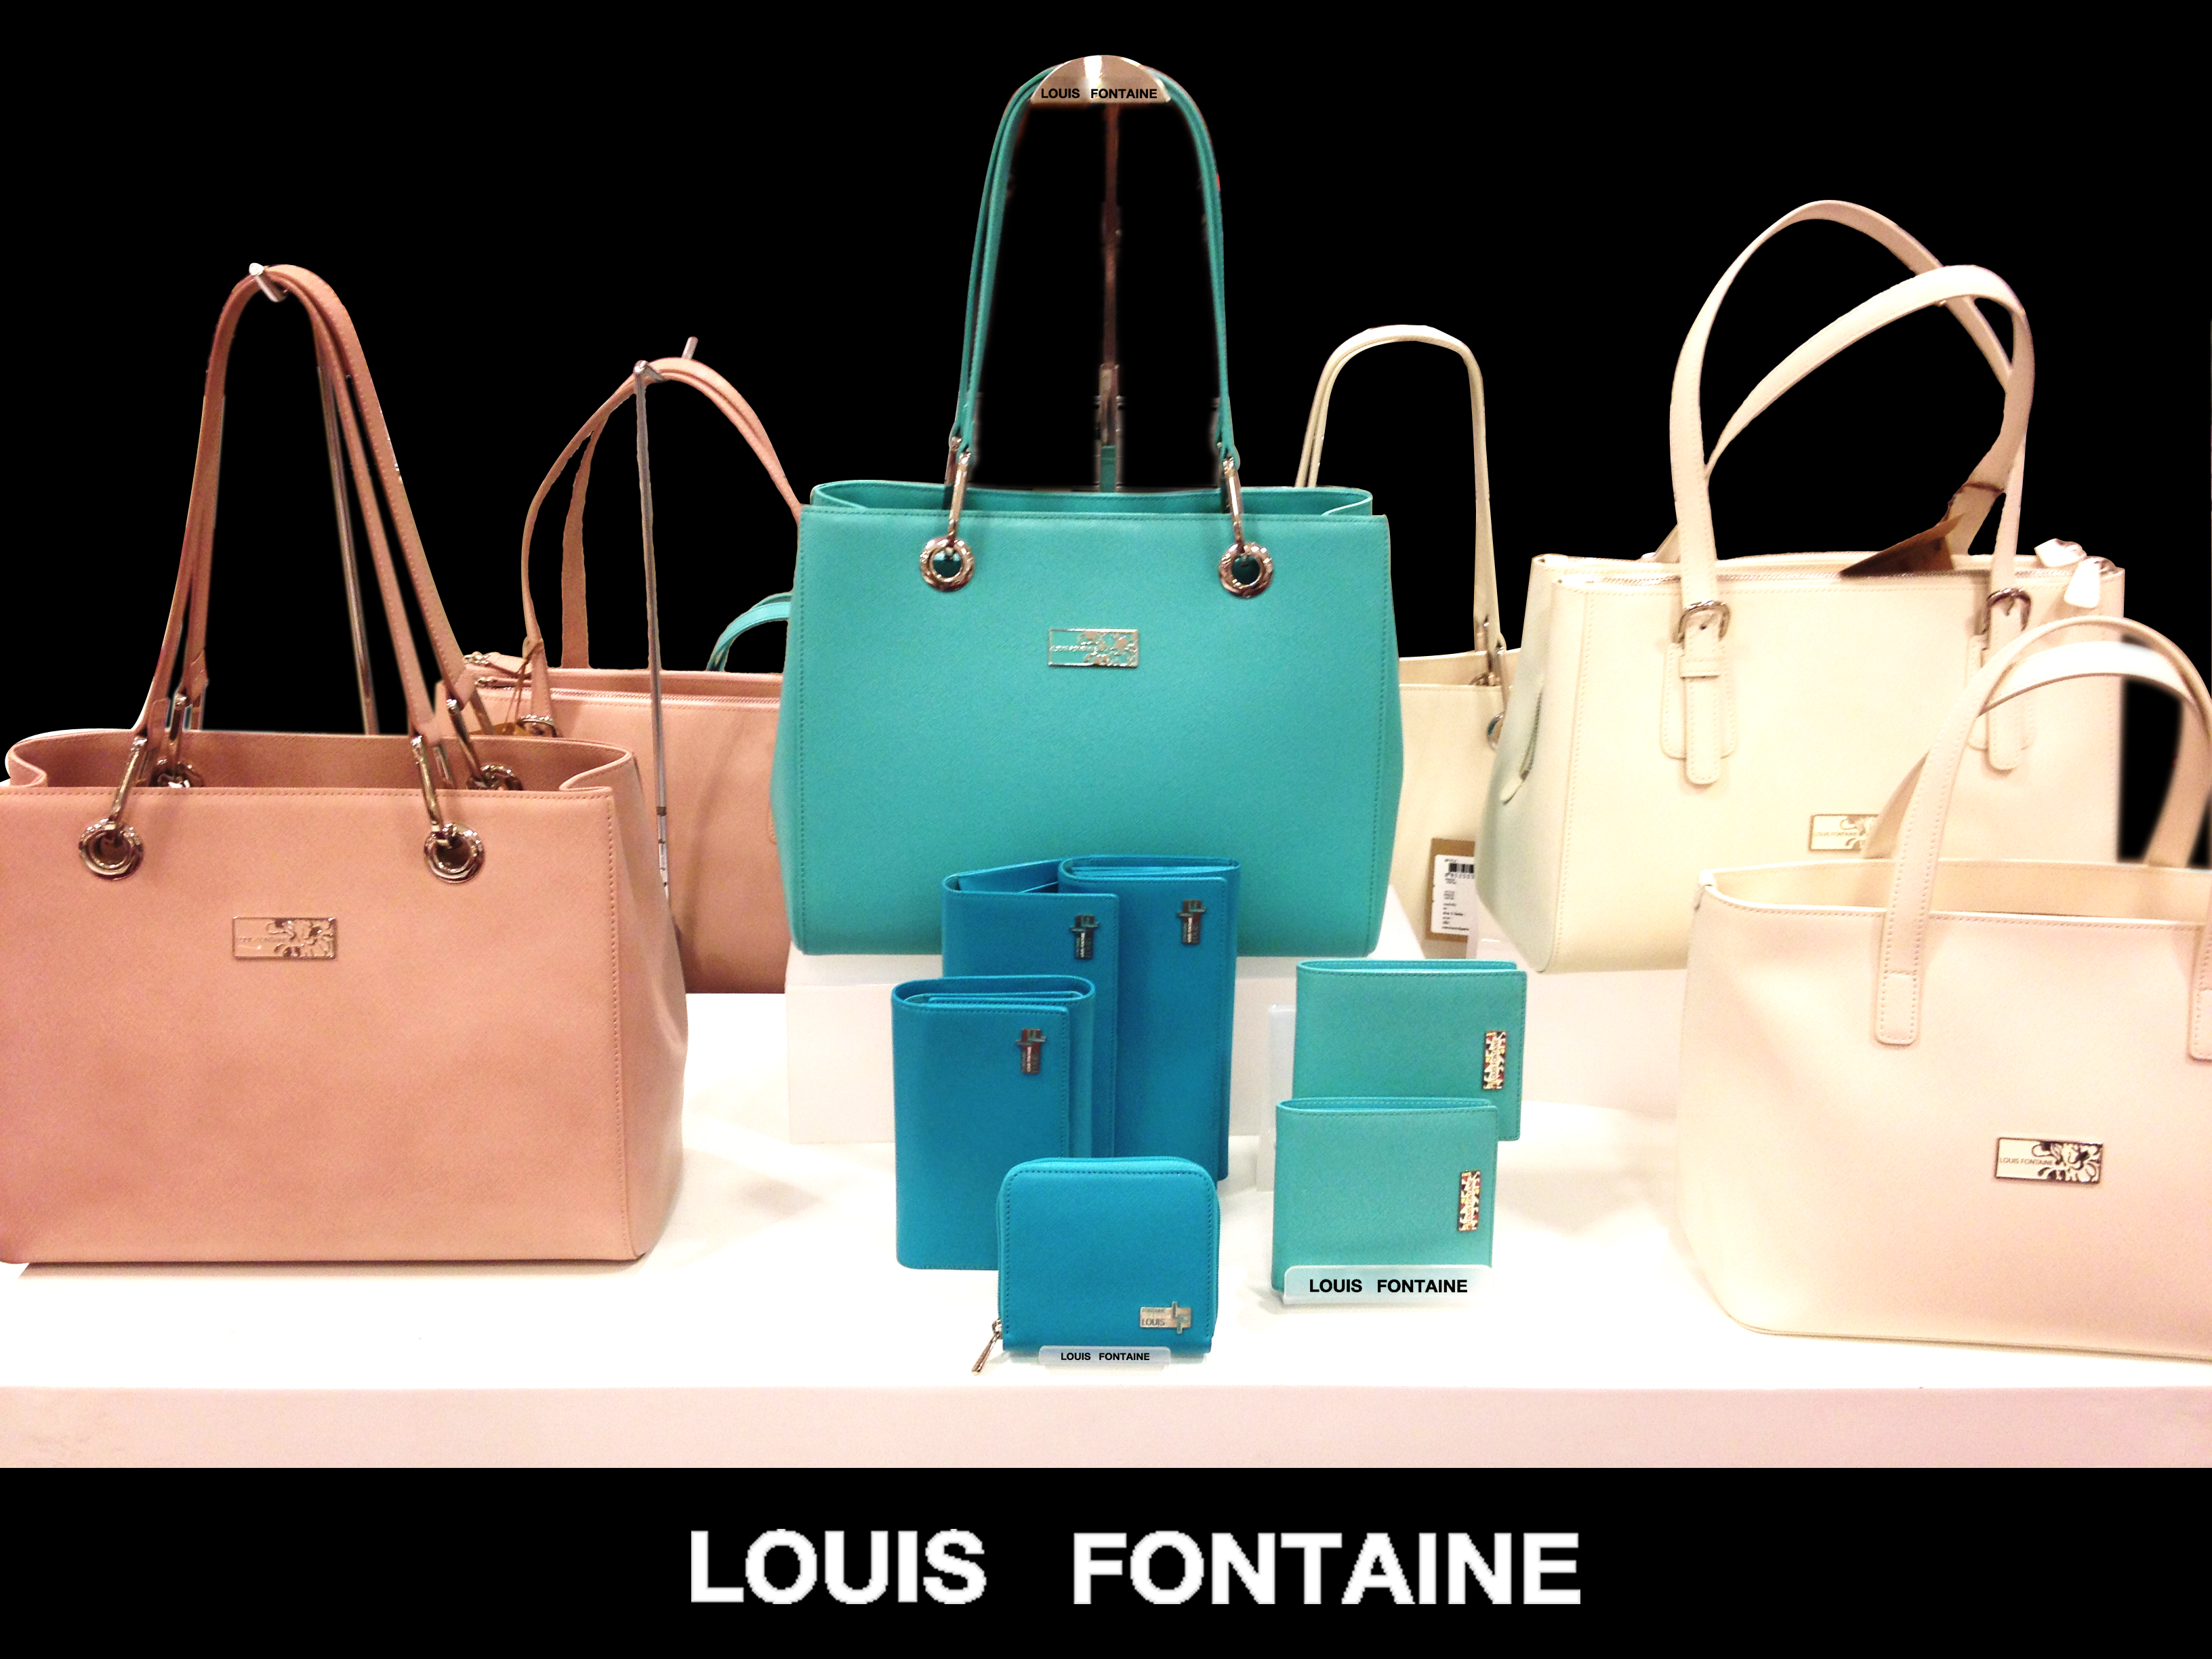 LOUIS FONTAINE: CONNER AT THE MALL BANGKAE – Louis Fontaine